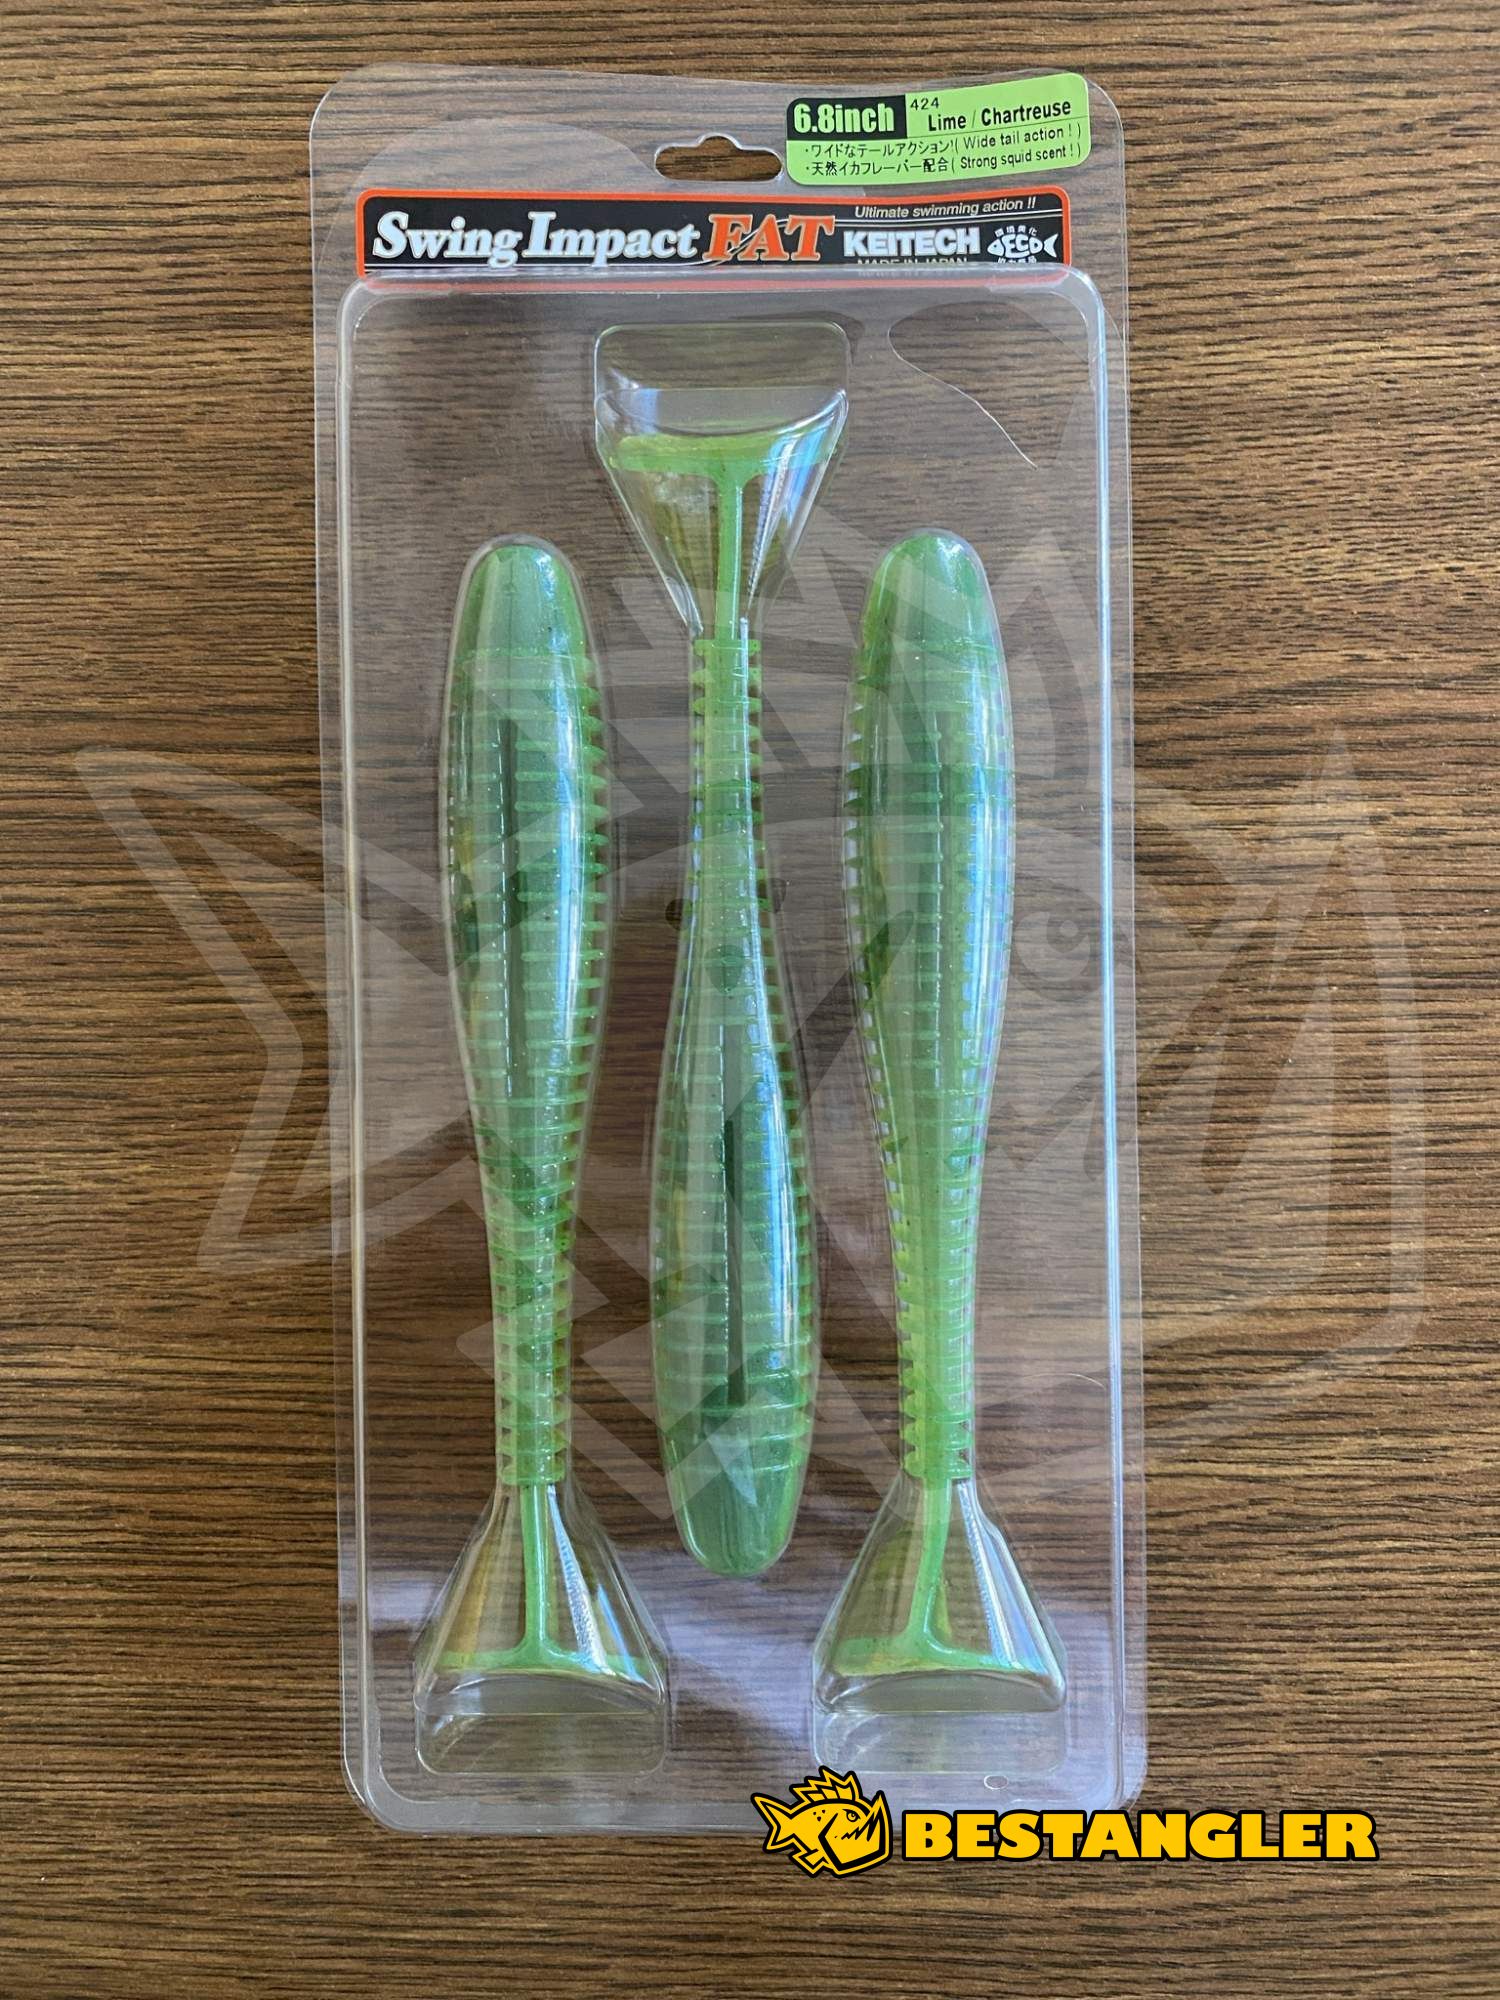 Keitech Swing Impact Fat 4.8 Review: More Than Just A Typical Swimbait!